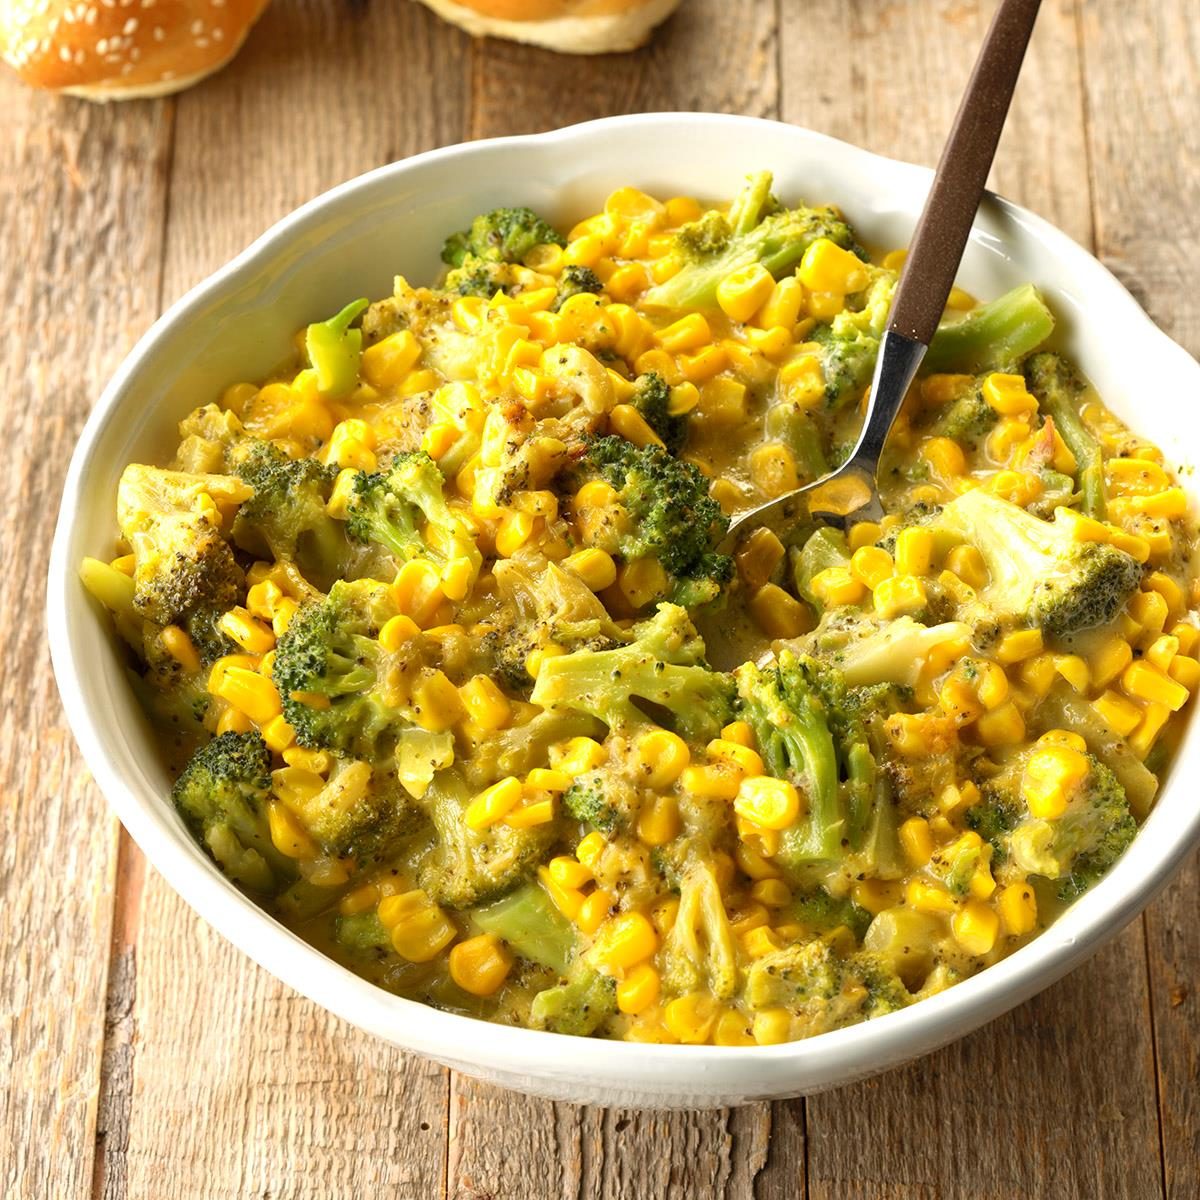 Corn And Broccoli In Cheese Sauce Exps Scmbz18 45657 C01 10 3b 16